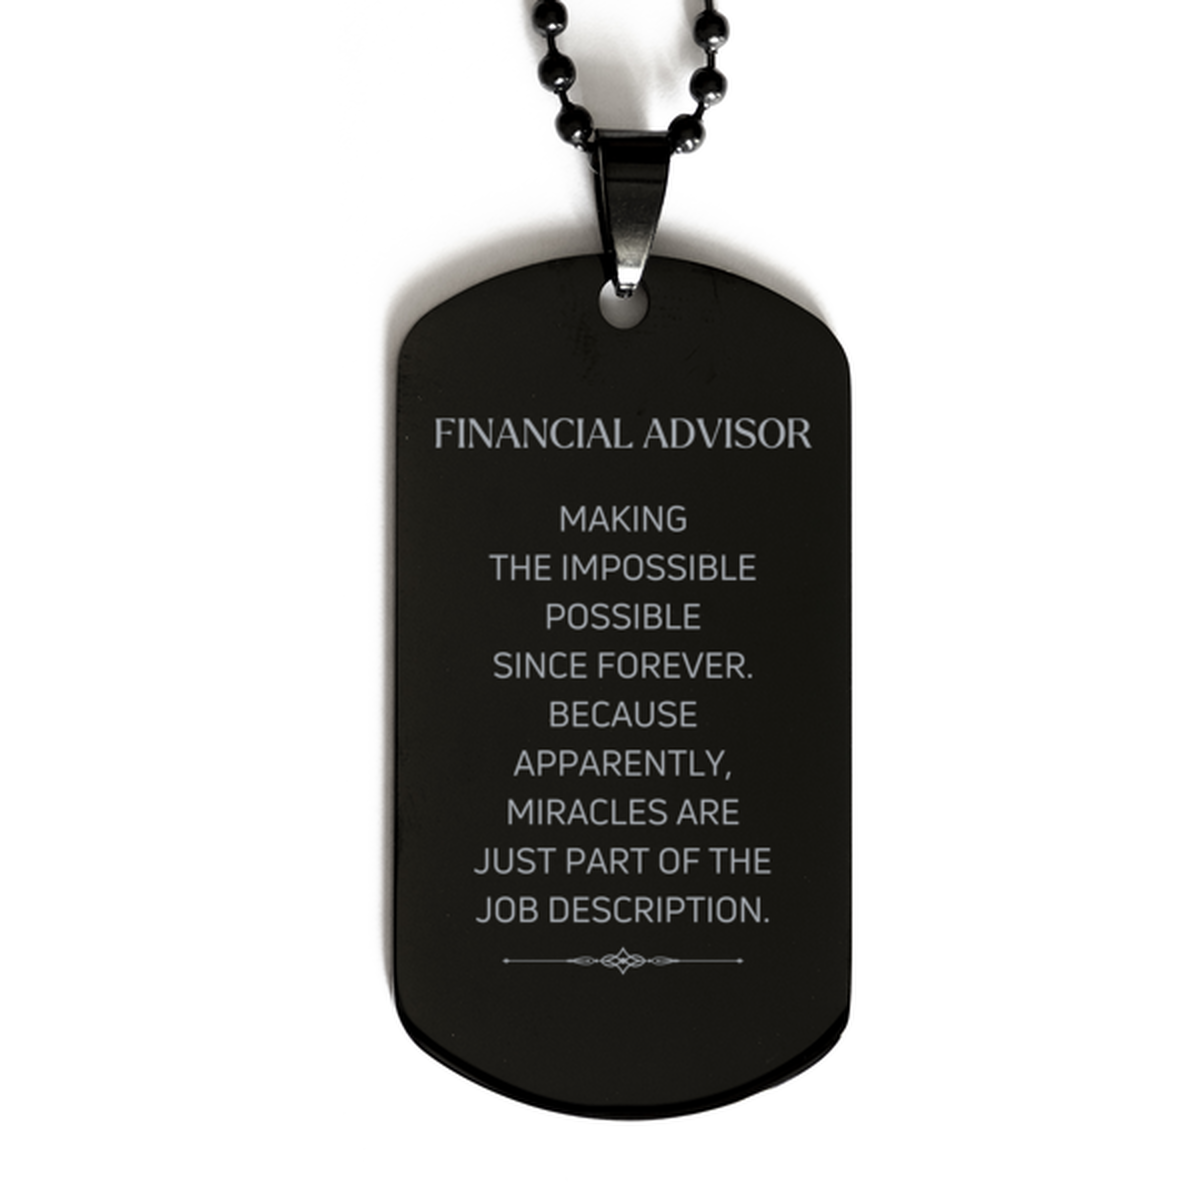 Funny Financial Advisor Gifts, Miracles are just part of the job description, Inspirational Birthday Black Dog Tag For Financial Advisor, Men, Women, Coworkers, Friends, Boss